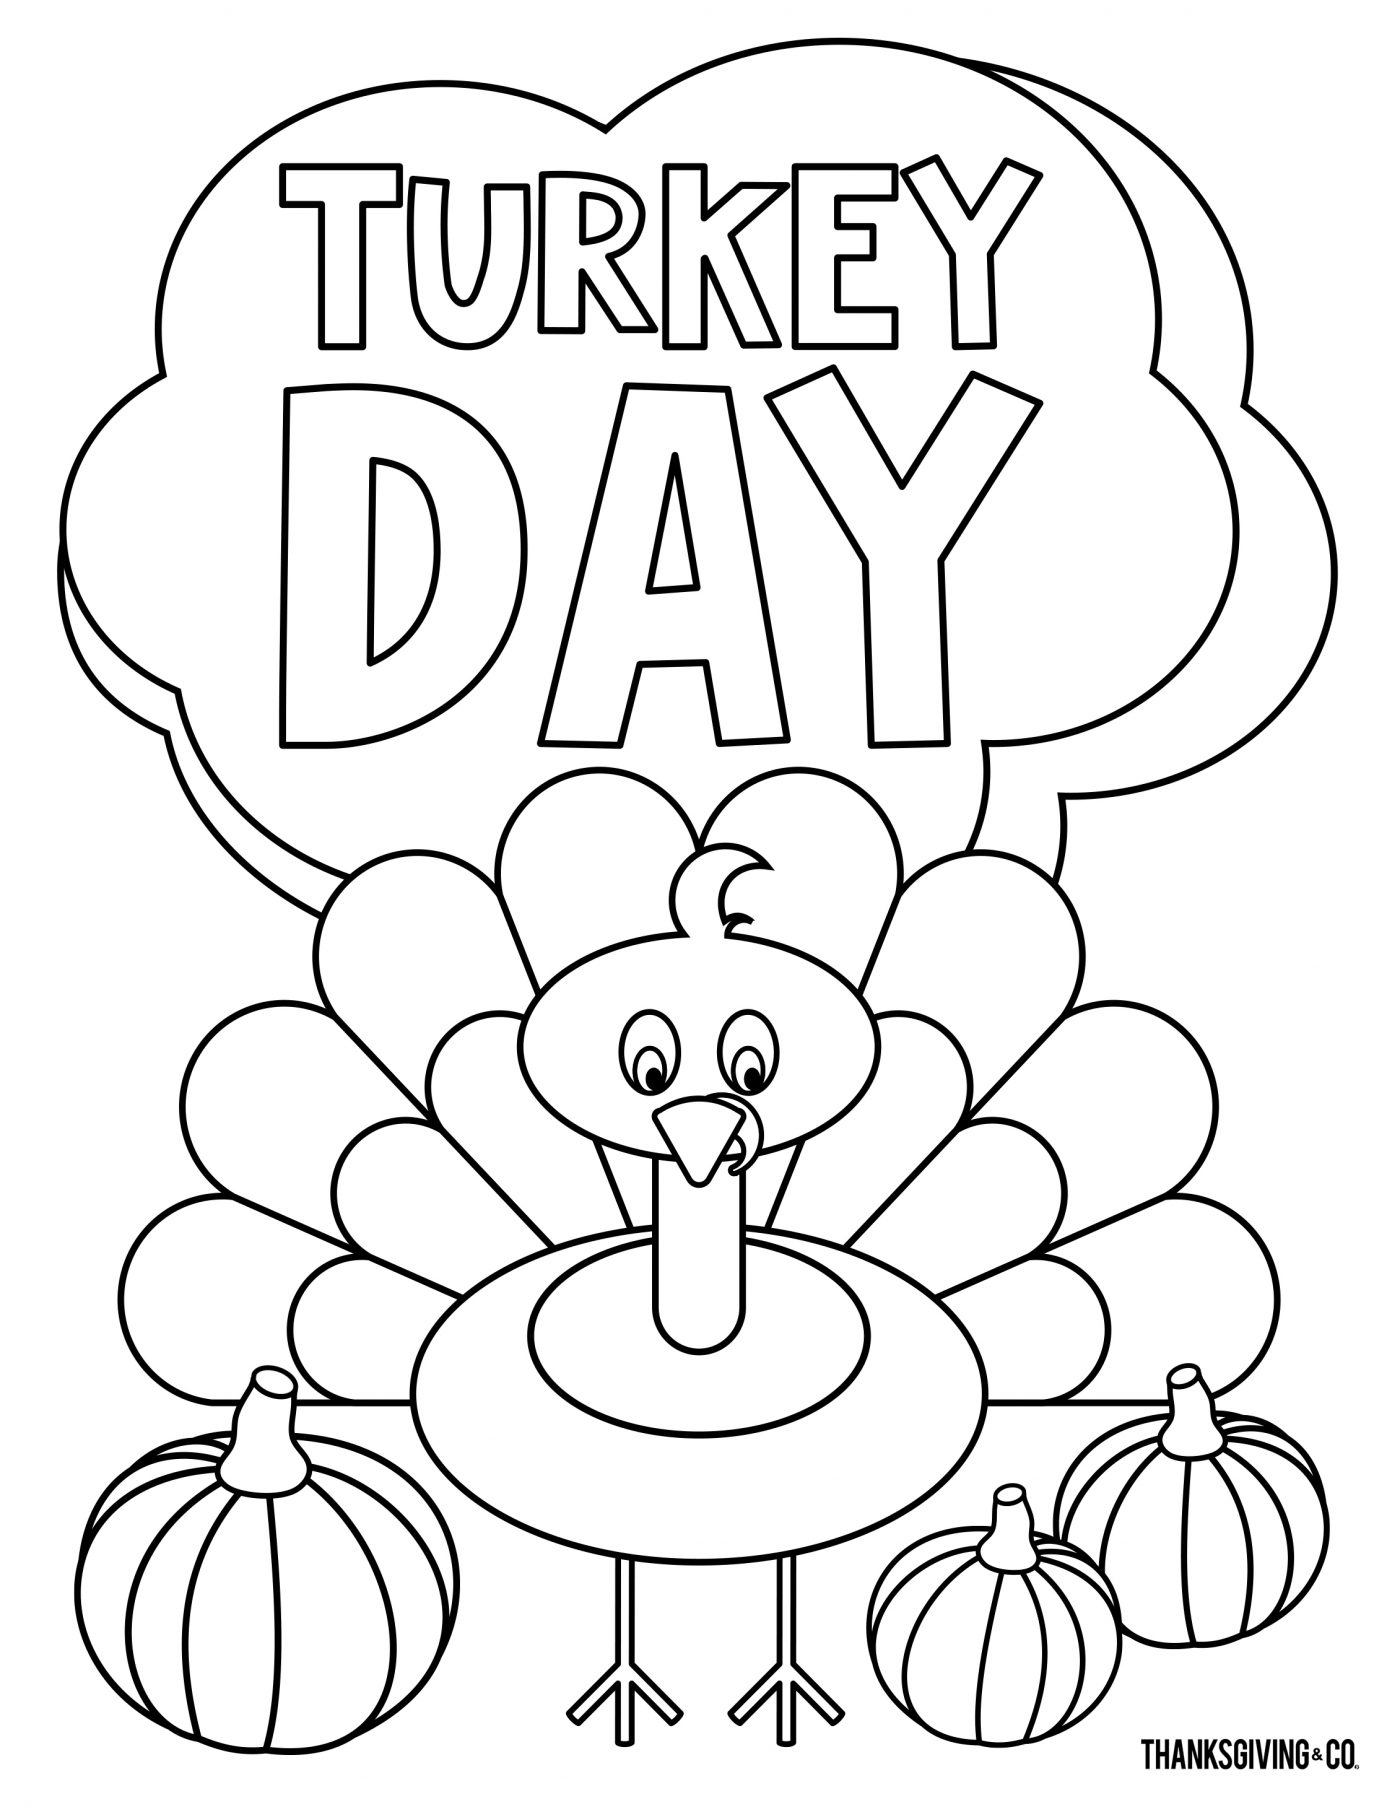 7 Thanksgiving coloring pages you can print